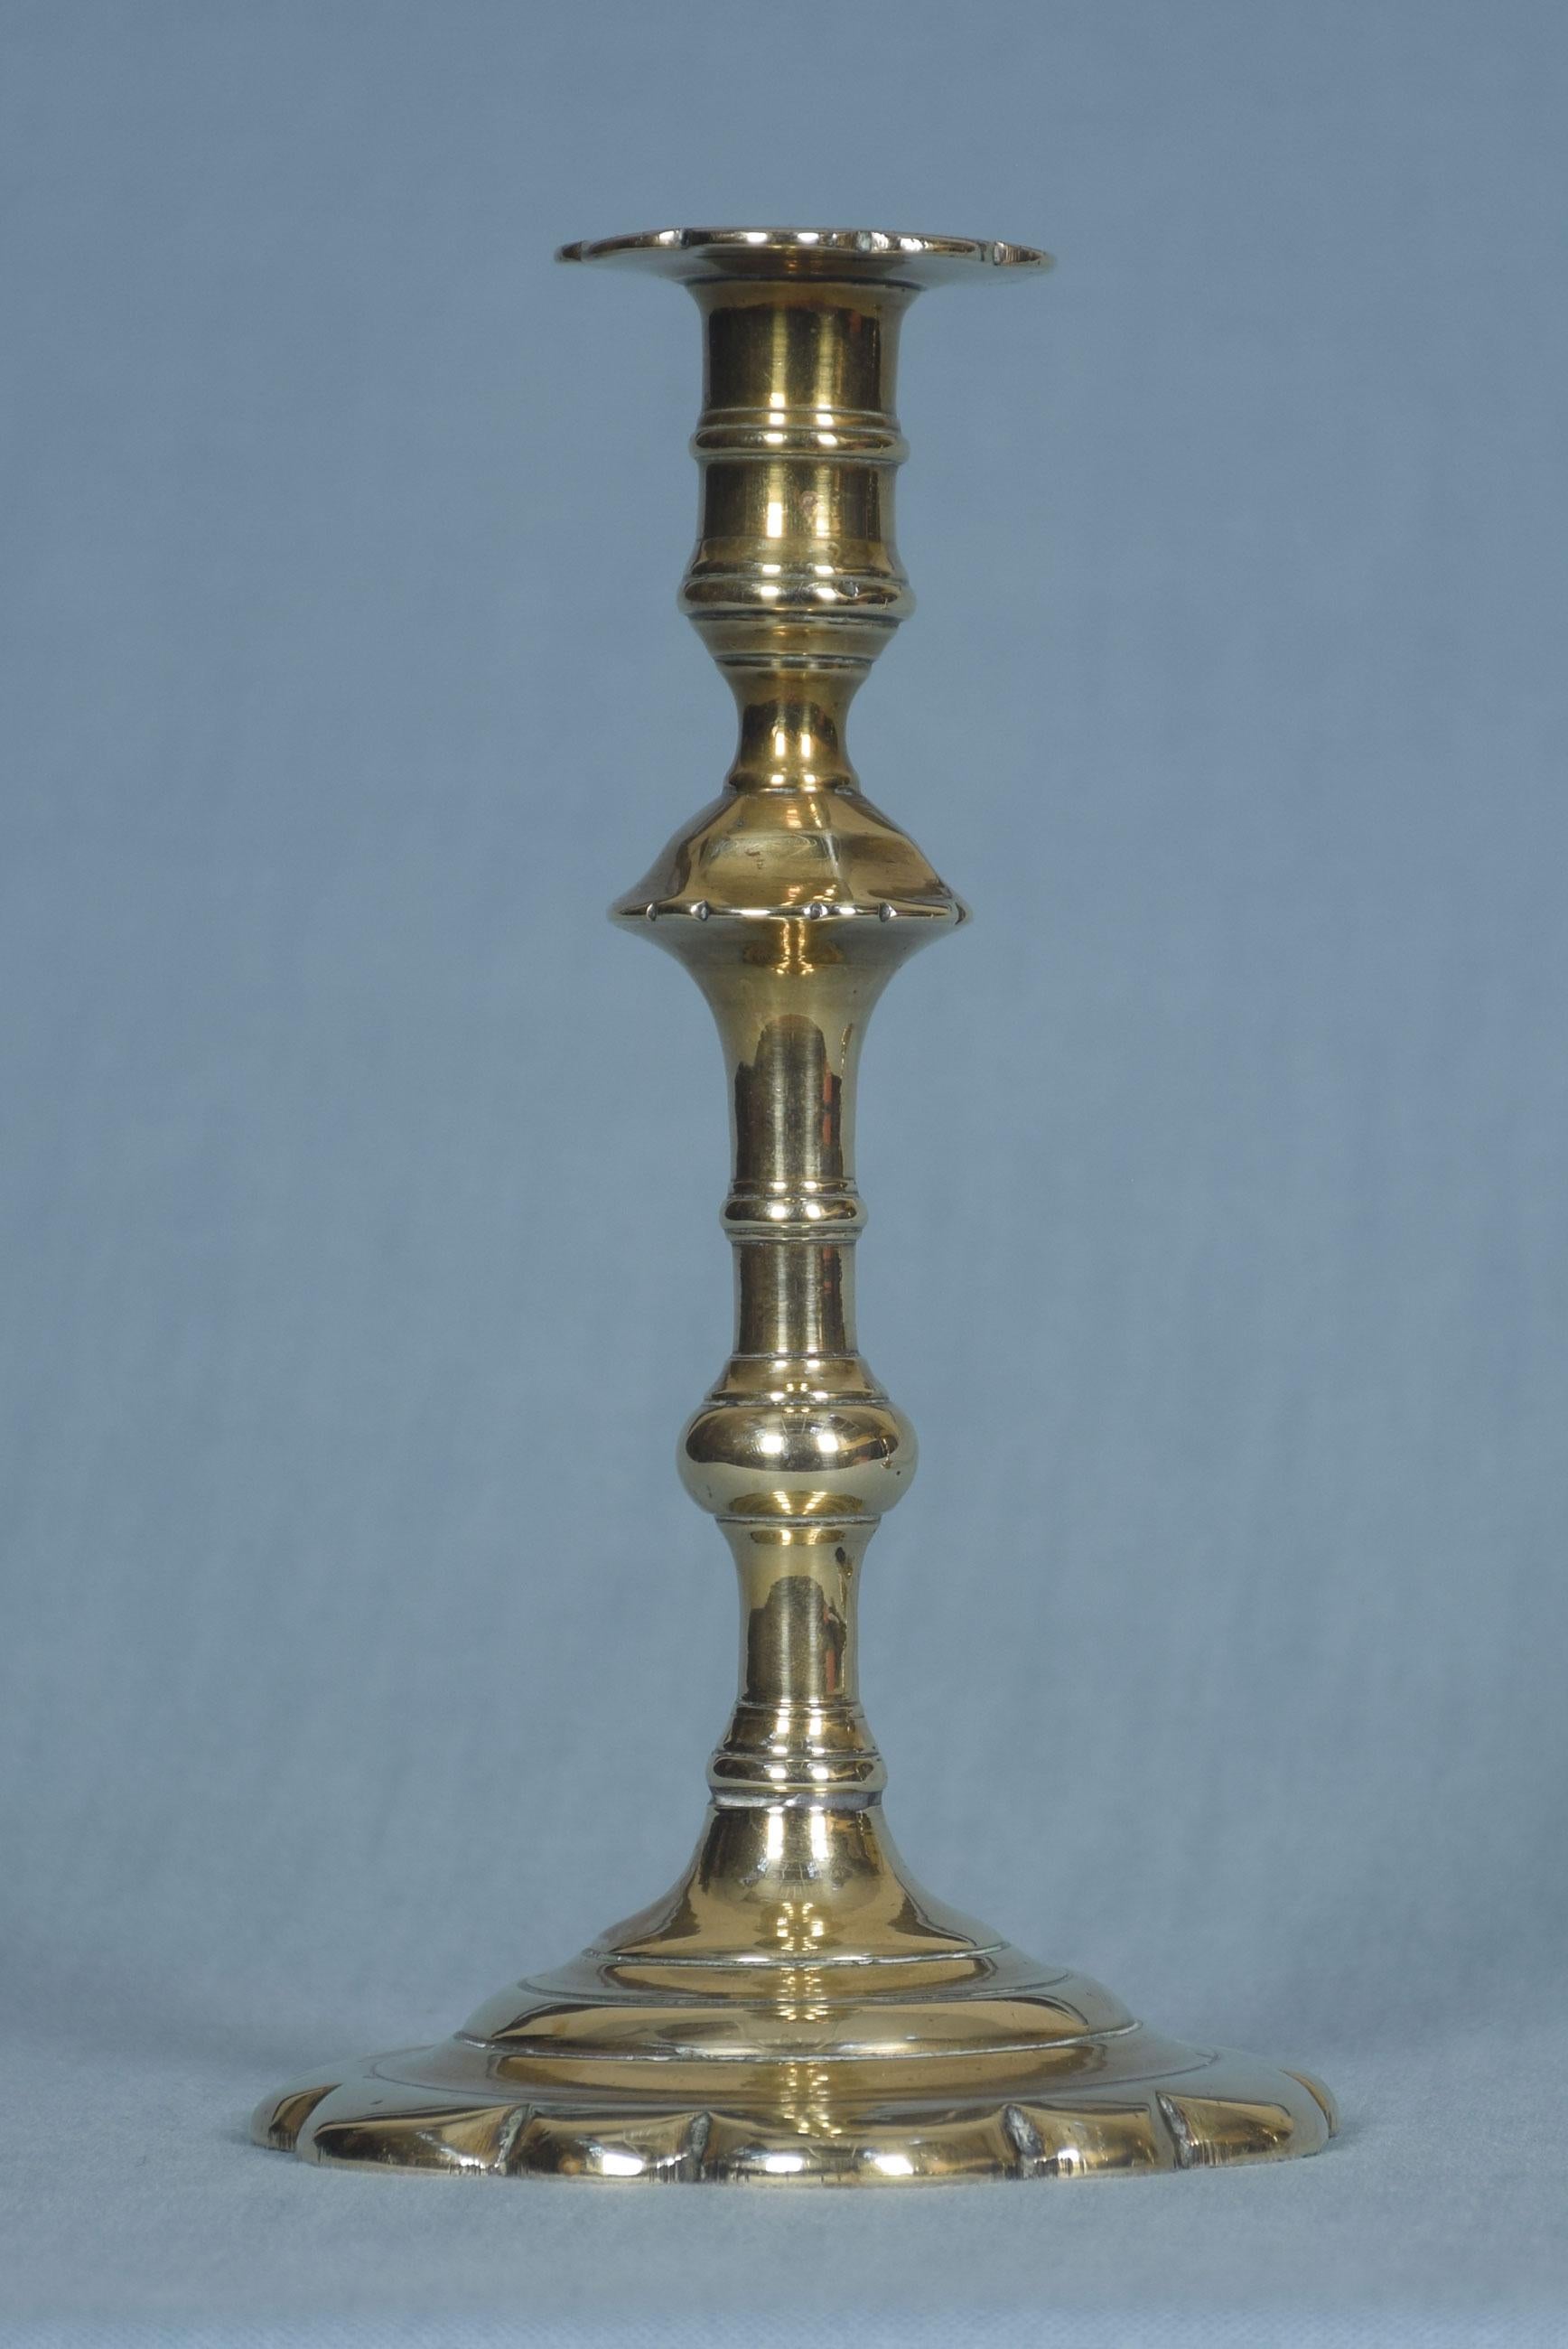 Pair of George II brass candlesticks each with a knopped stem and a petal base.
Dimensions
Height 8 inches
Length 4.5 inches
Depth 4.5 inches.